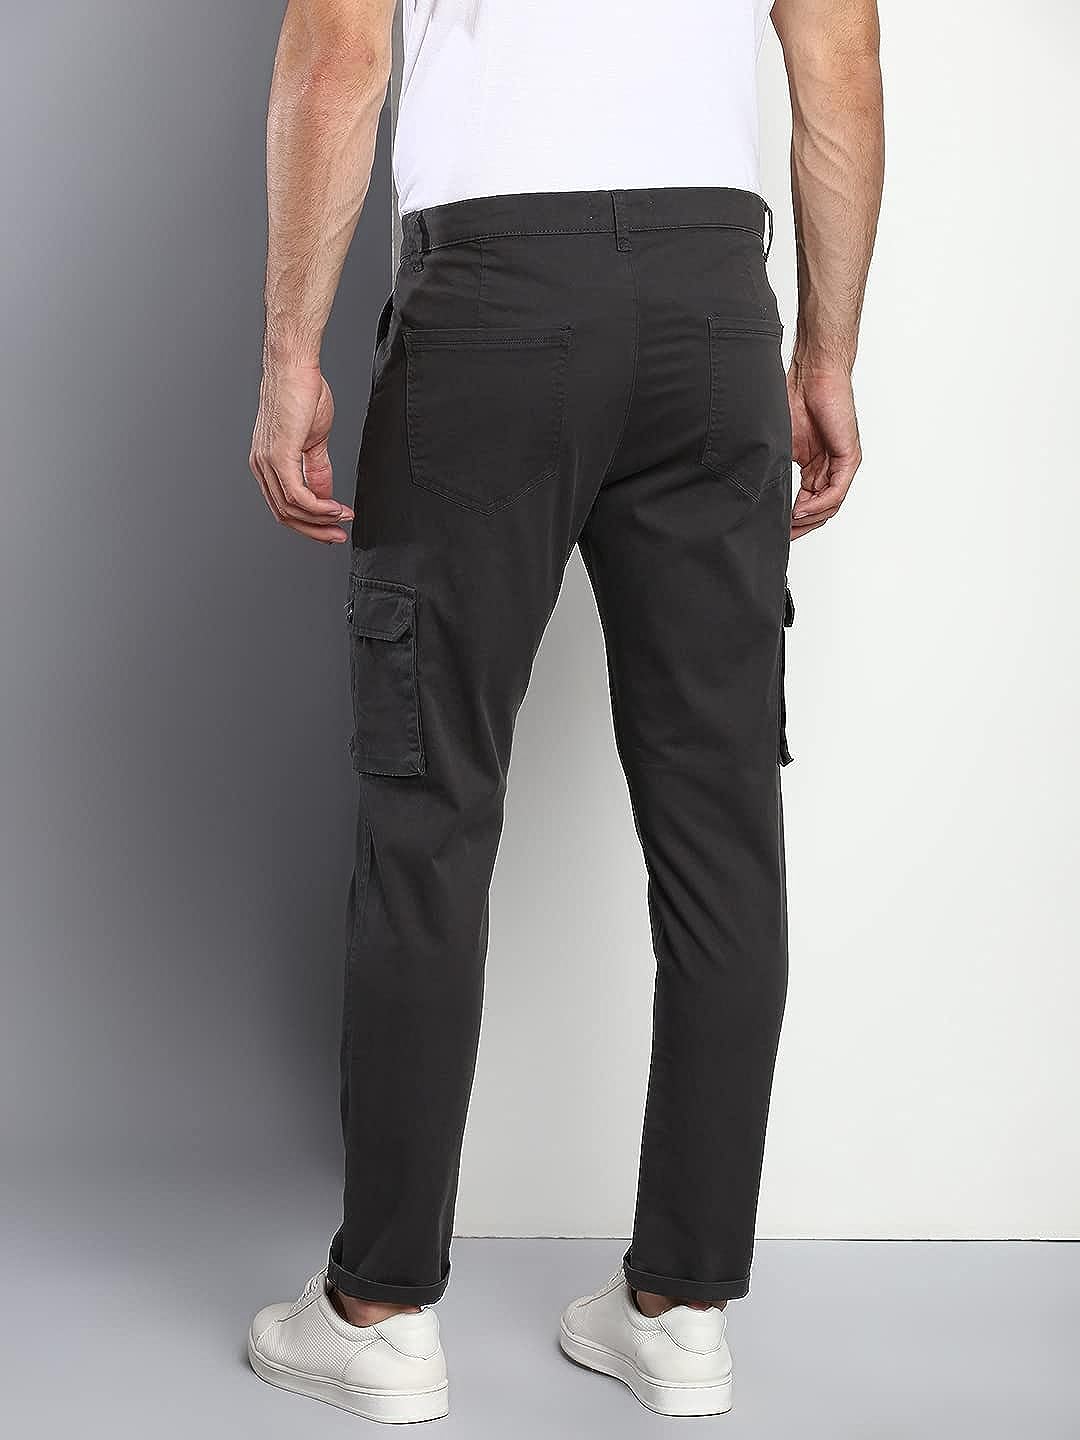 Buy Online|Spykar Men Ecru Cotton Tapered Fit Ankle Length Mid Rise Cargo  Pant